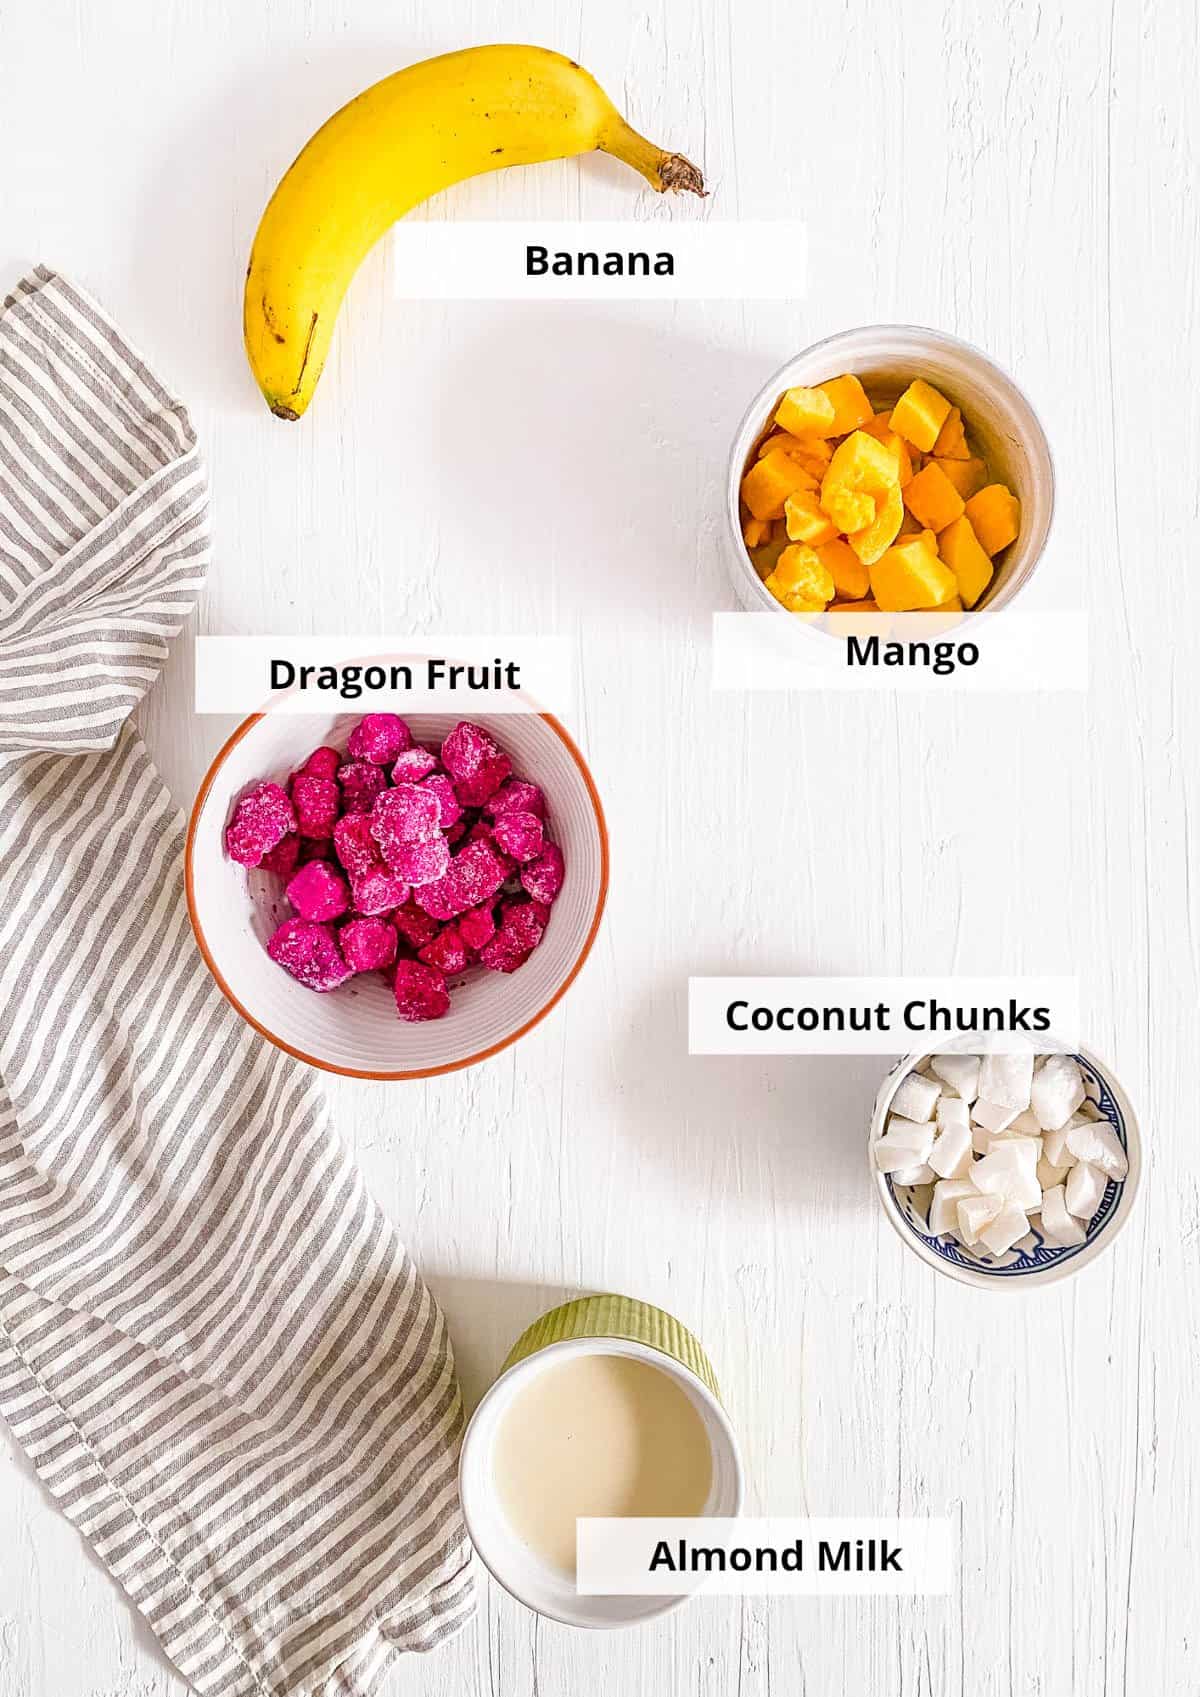 All of the ingredients for easy healthy dragon fruit smoothie recipe with banana and mango.